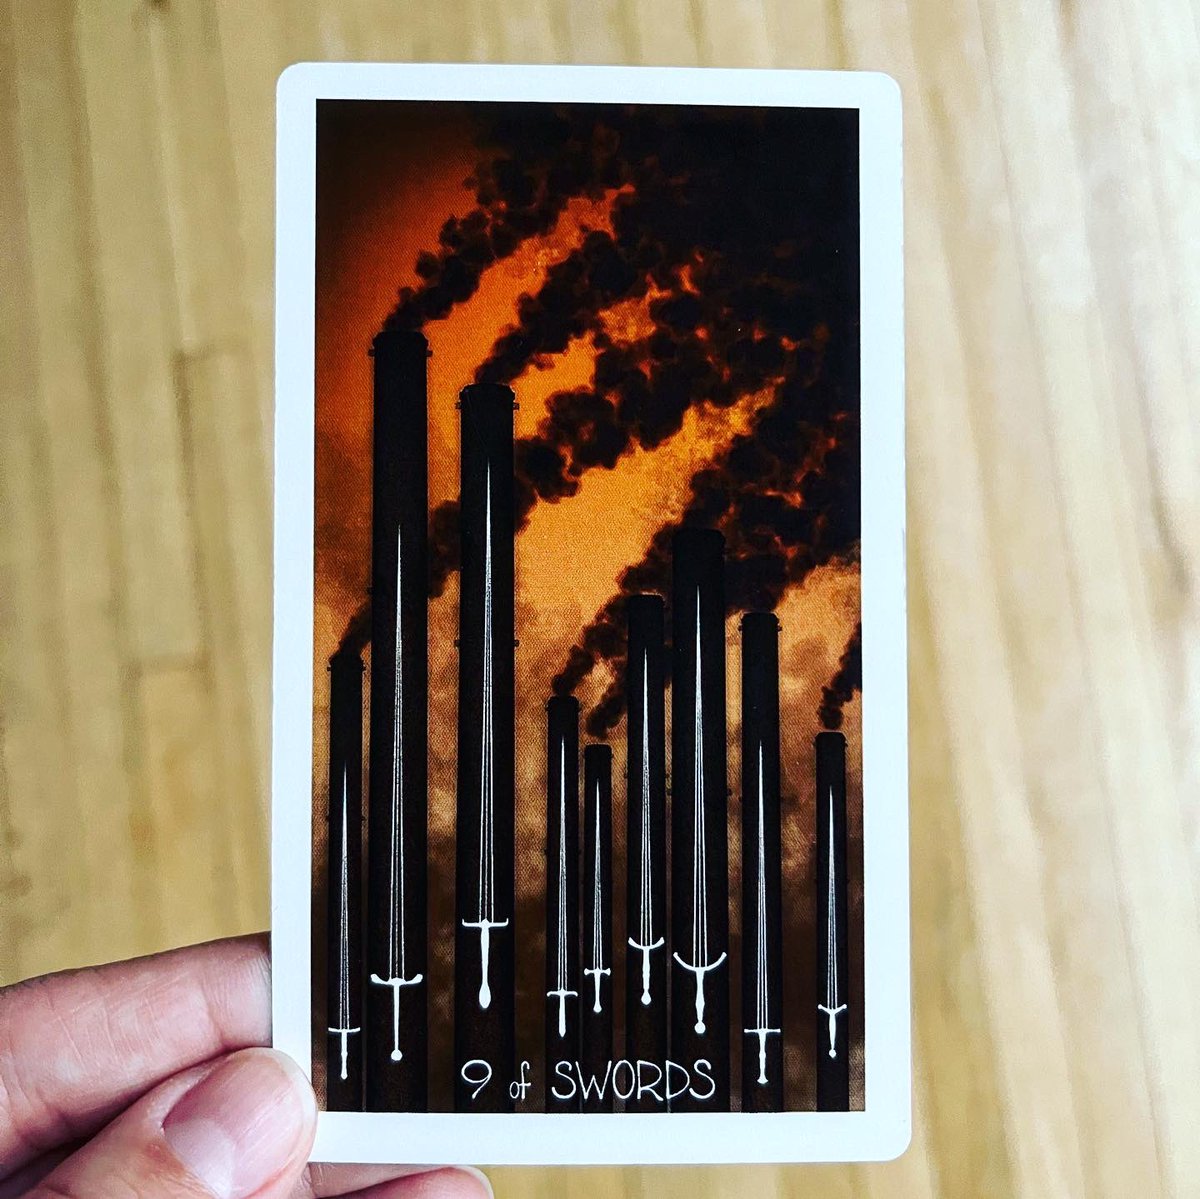 Card of the day (Wayhome Tarot): Watch for any unhelpful/old/anxious thoughts that pollute your mind today. If you’re having nightmares, your mind might be too full of energy. Let those anxious thoughts go!
.
#watchyourthoughts #letgo #tarotcardoftheday #anxietypath